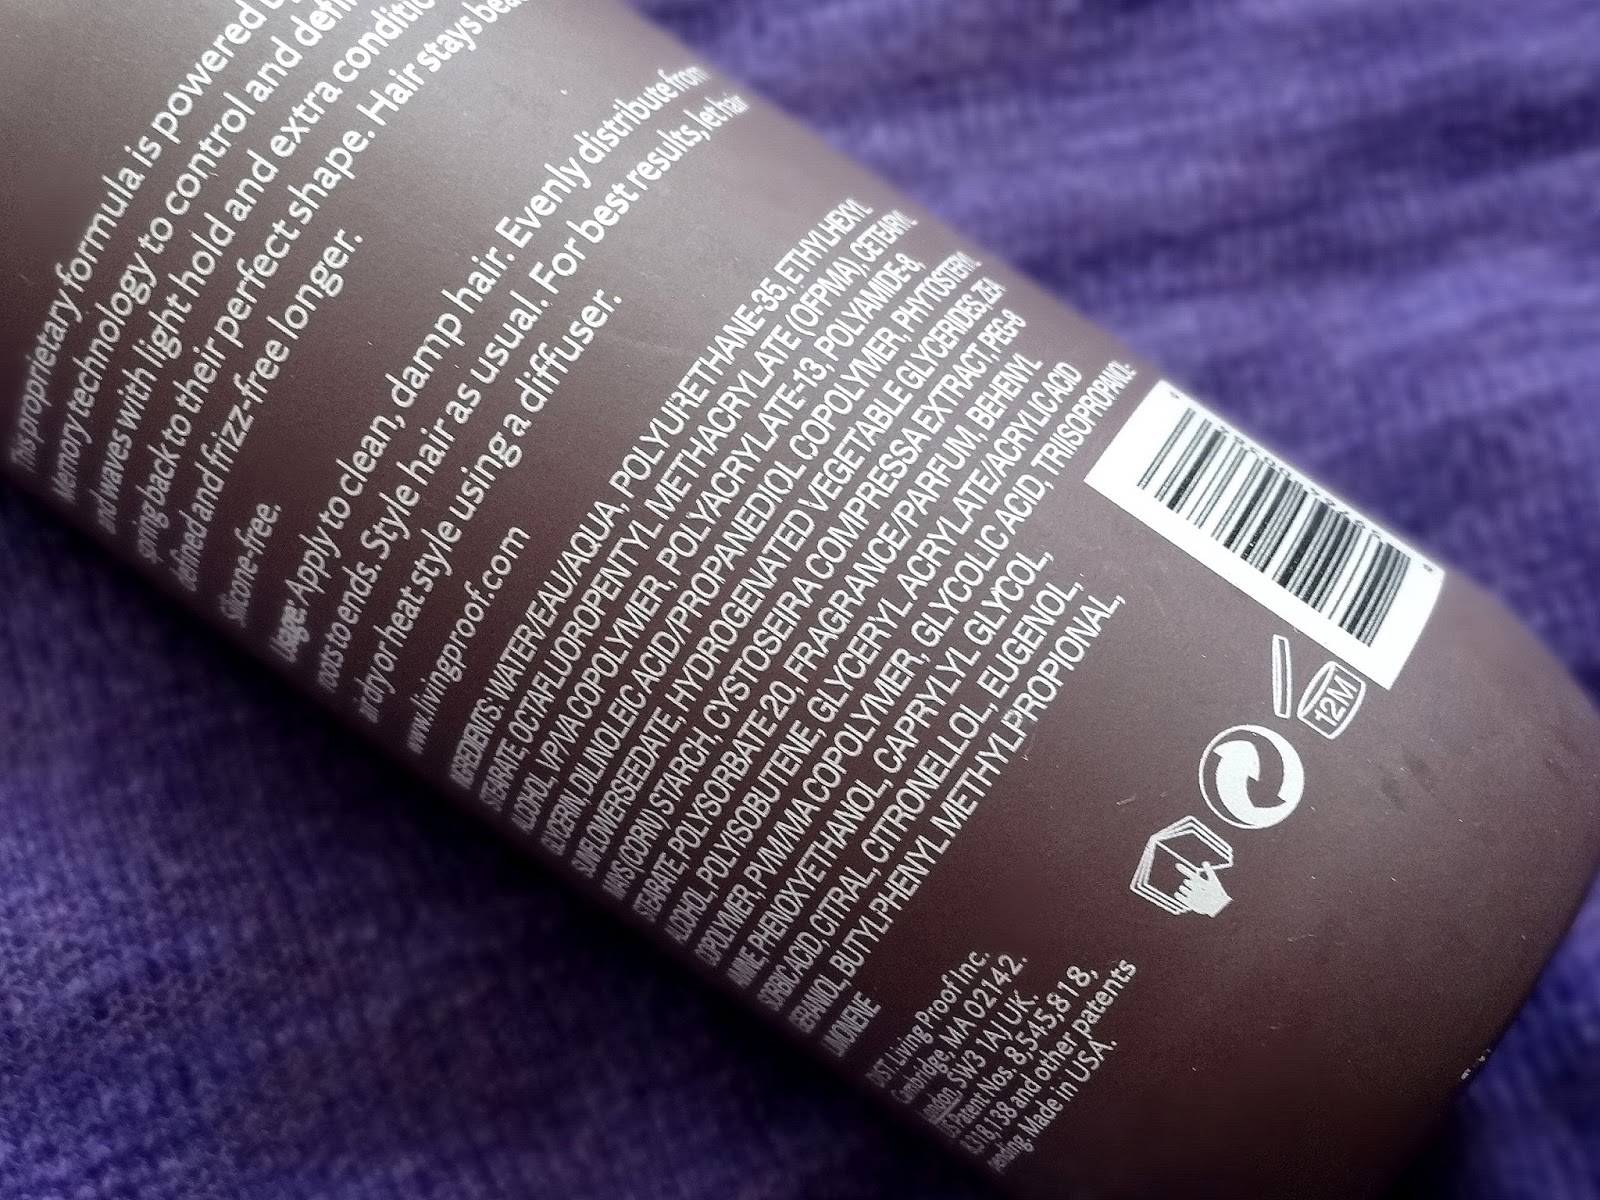 Living Proof Curl Defining Styling Cream Ingredients